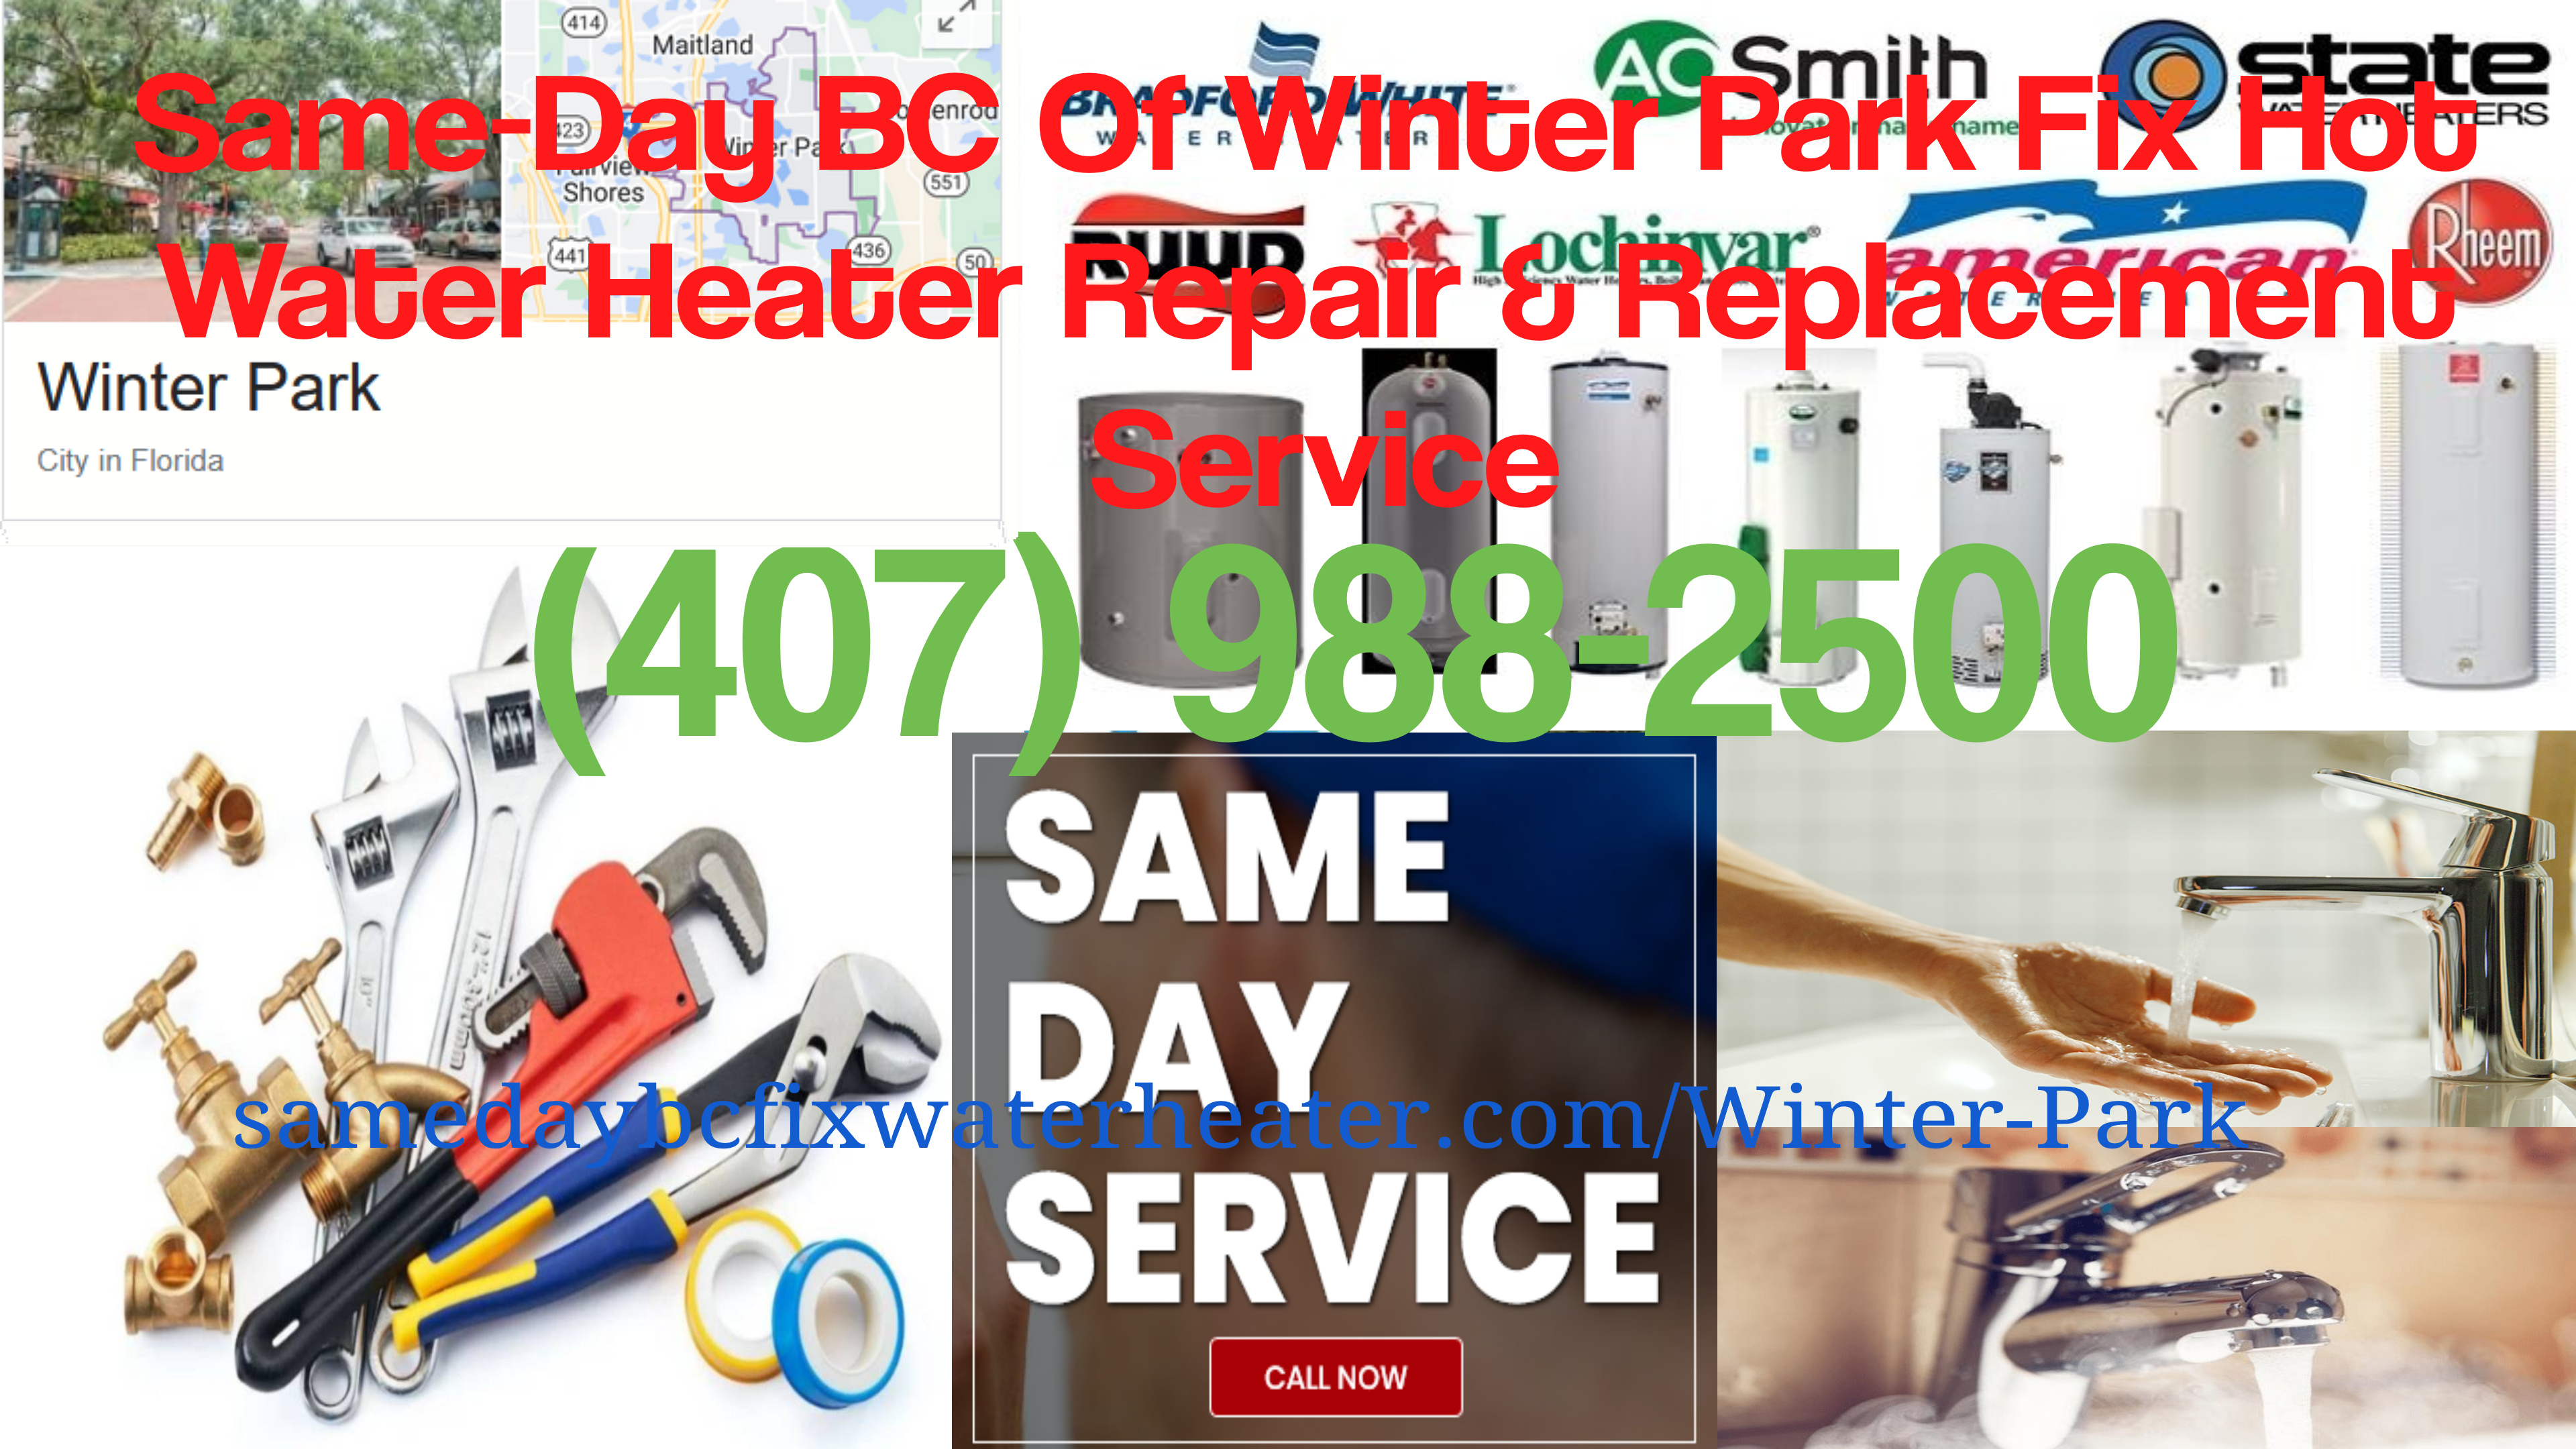 SameDay BC Fix Water Heater Repair Service is Now Serving Winter Park, FL, and Surrounding Areas